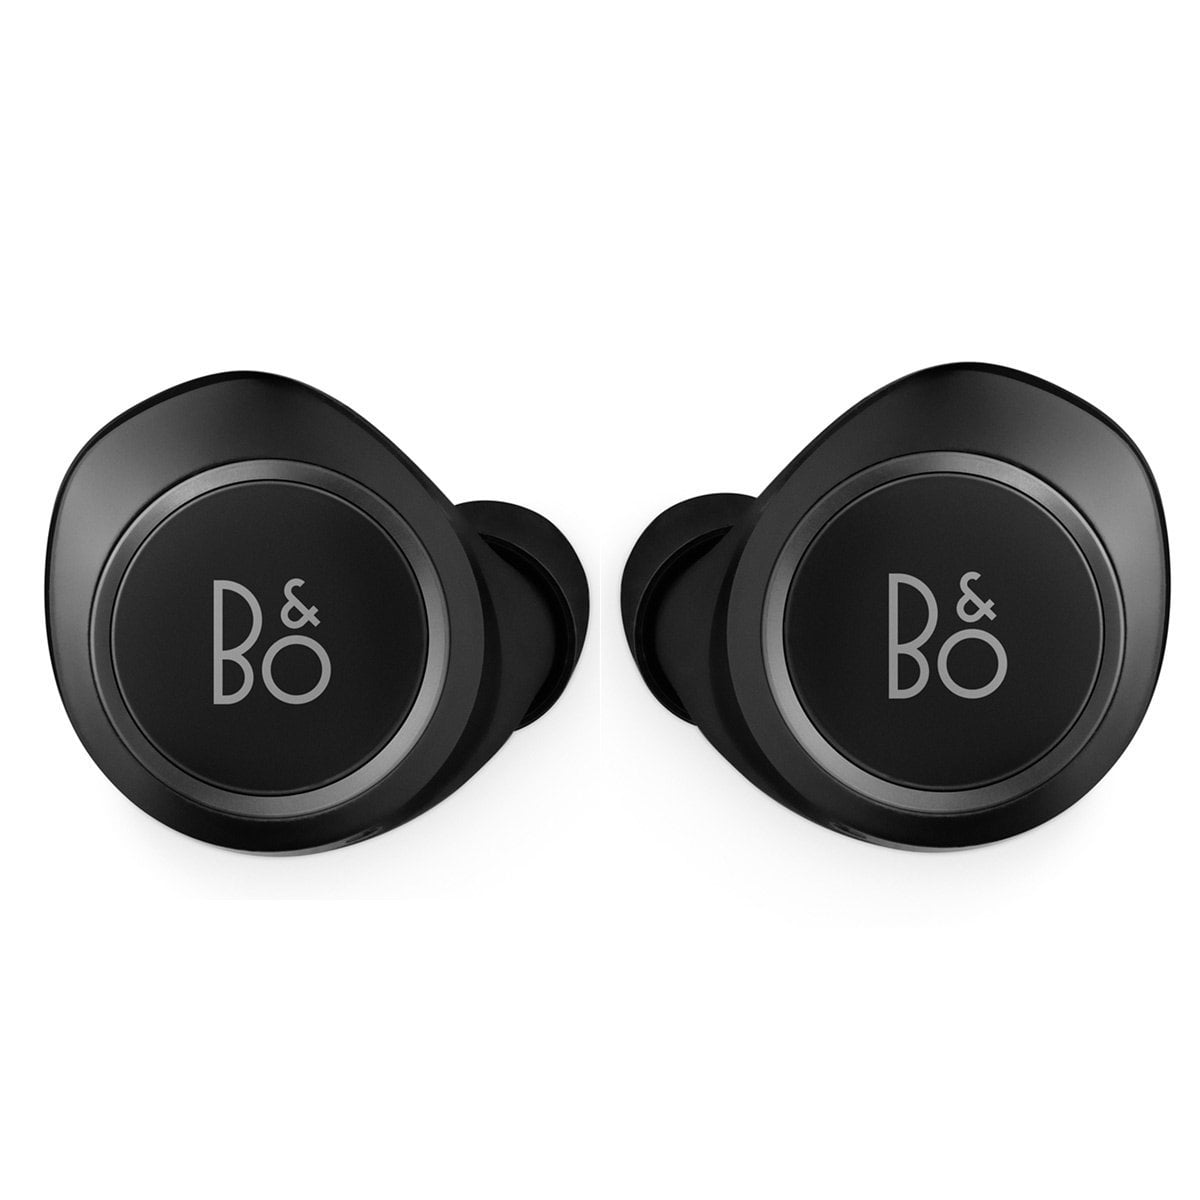 Bang & Olufsen Beoplay E8 Wireless Bluetooth Earbuds - Black